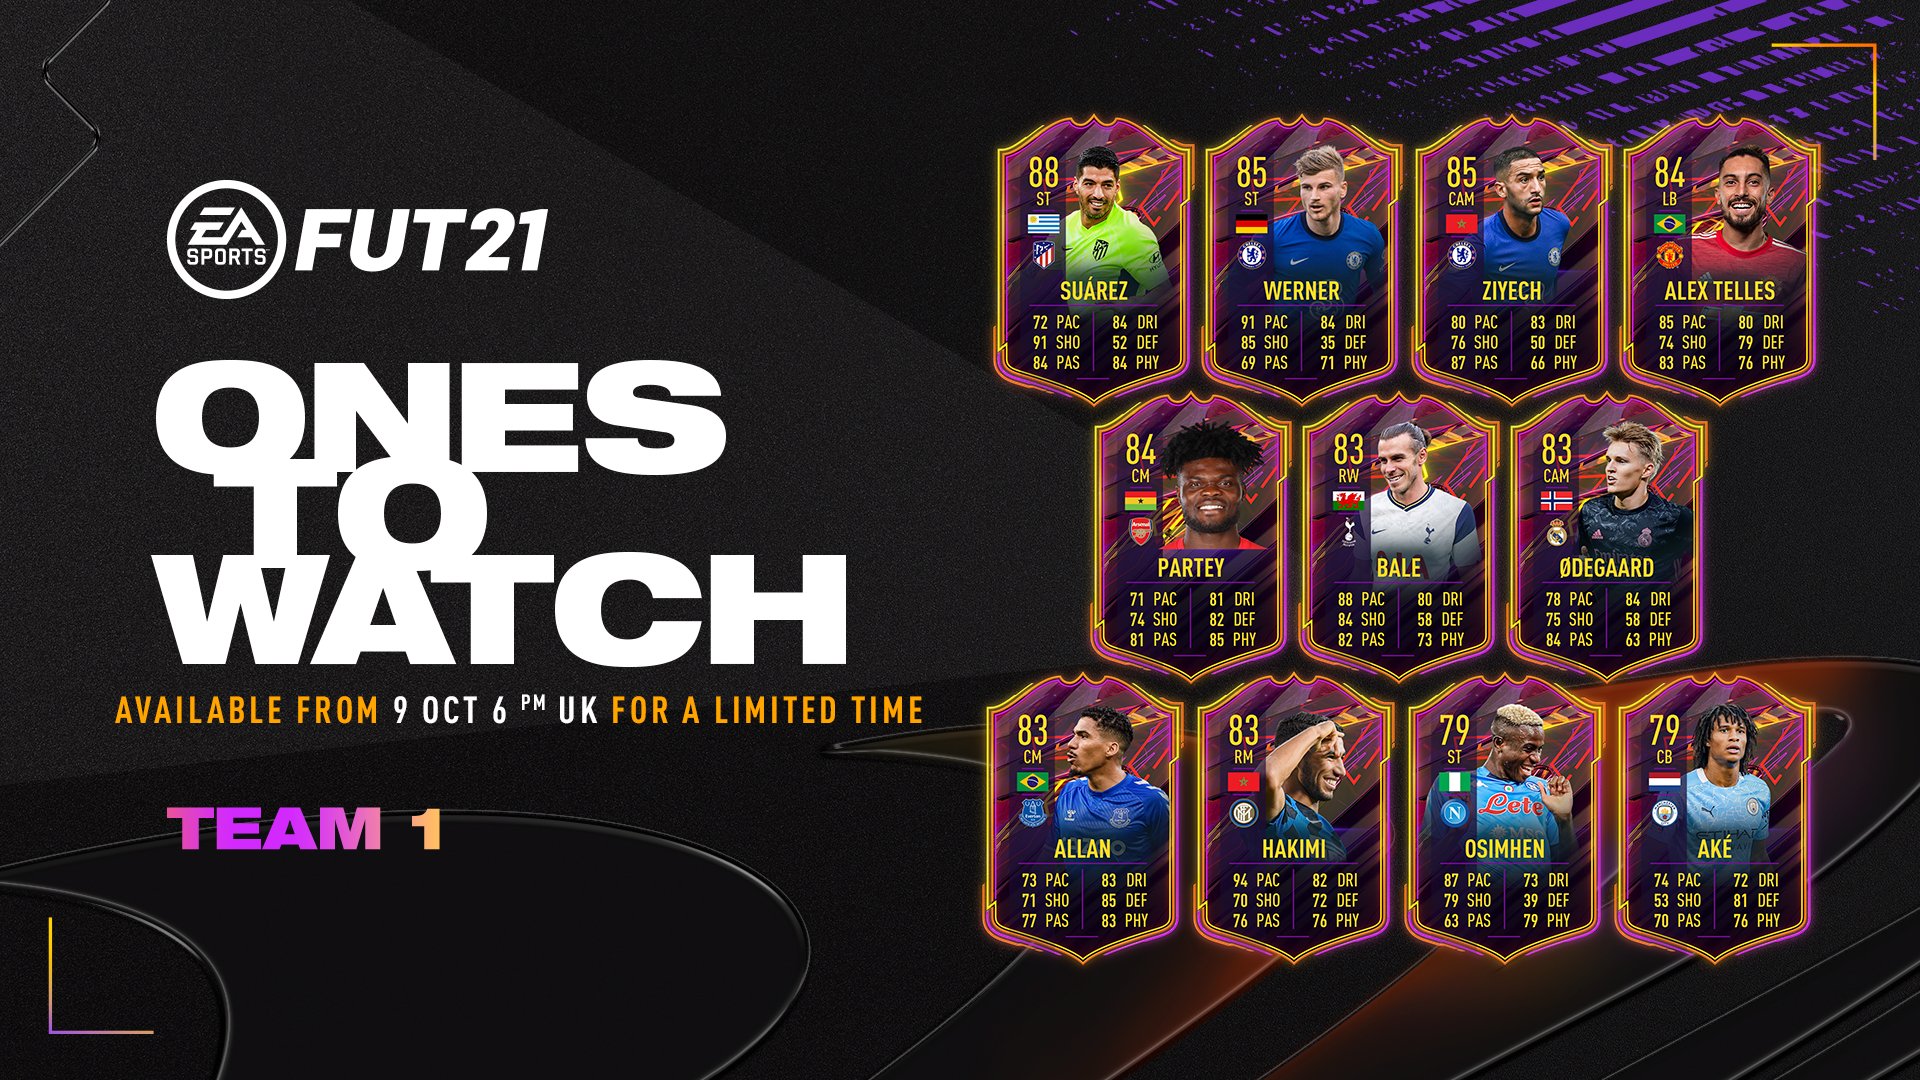 EA releases first OTW cards for FIFA 21 Ultimate Team - Dot Esports